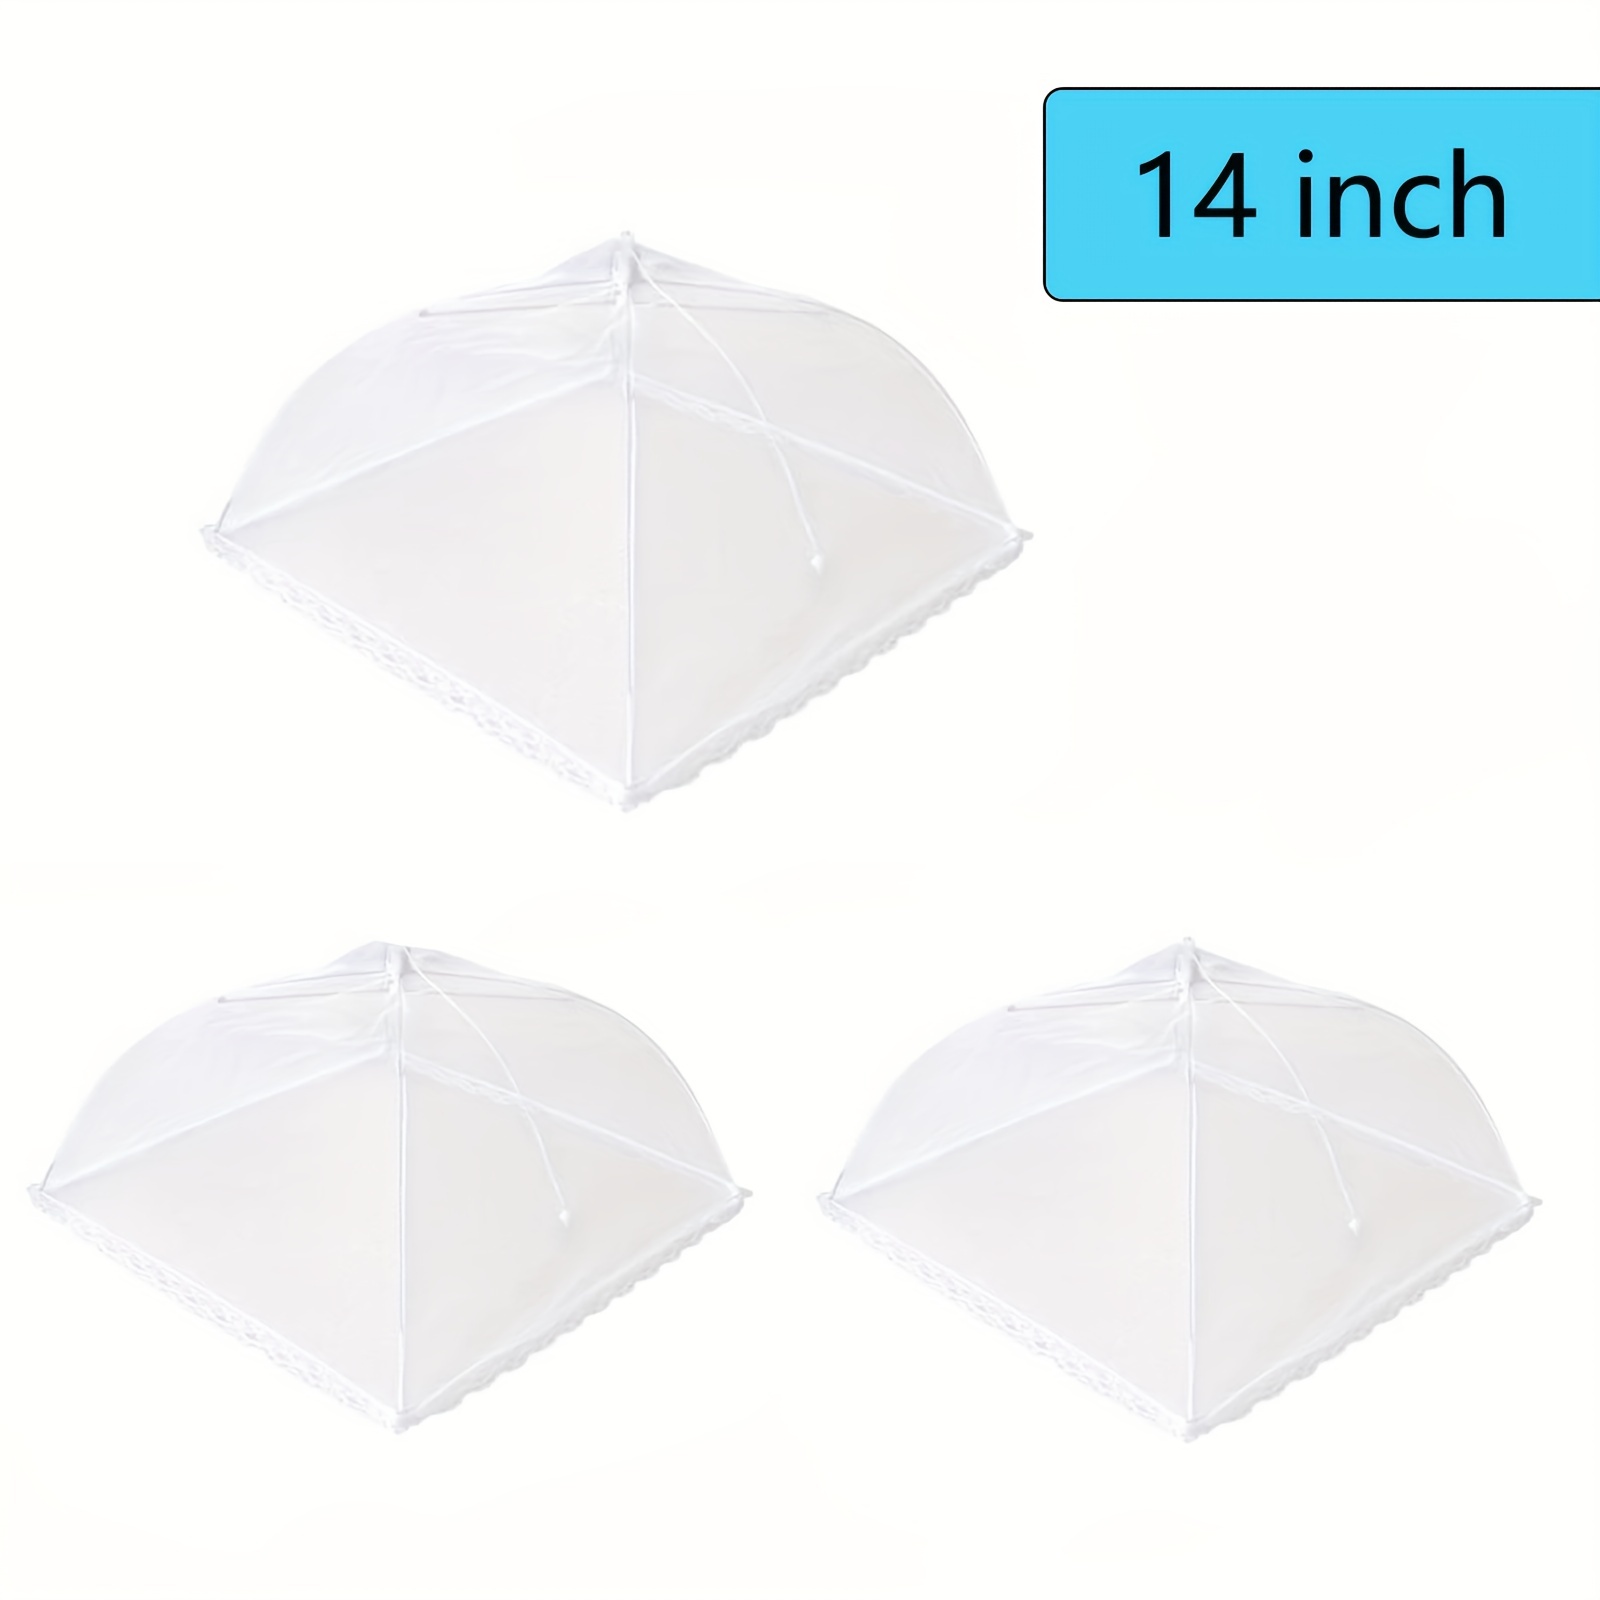 

3 Pack Food Covers For Outdoors Mesh Screen 14 Inch/17inch Collapsible And Reusable Mesh Food Covers For Outside, Bbq Party Supplies, Fruit Cover